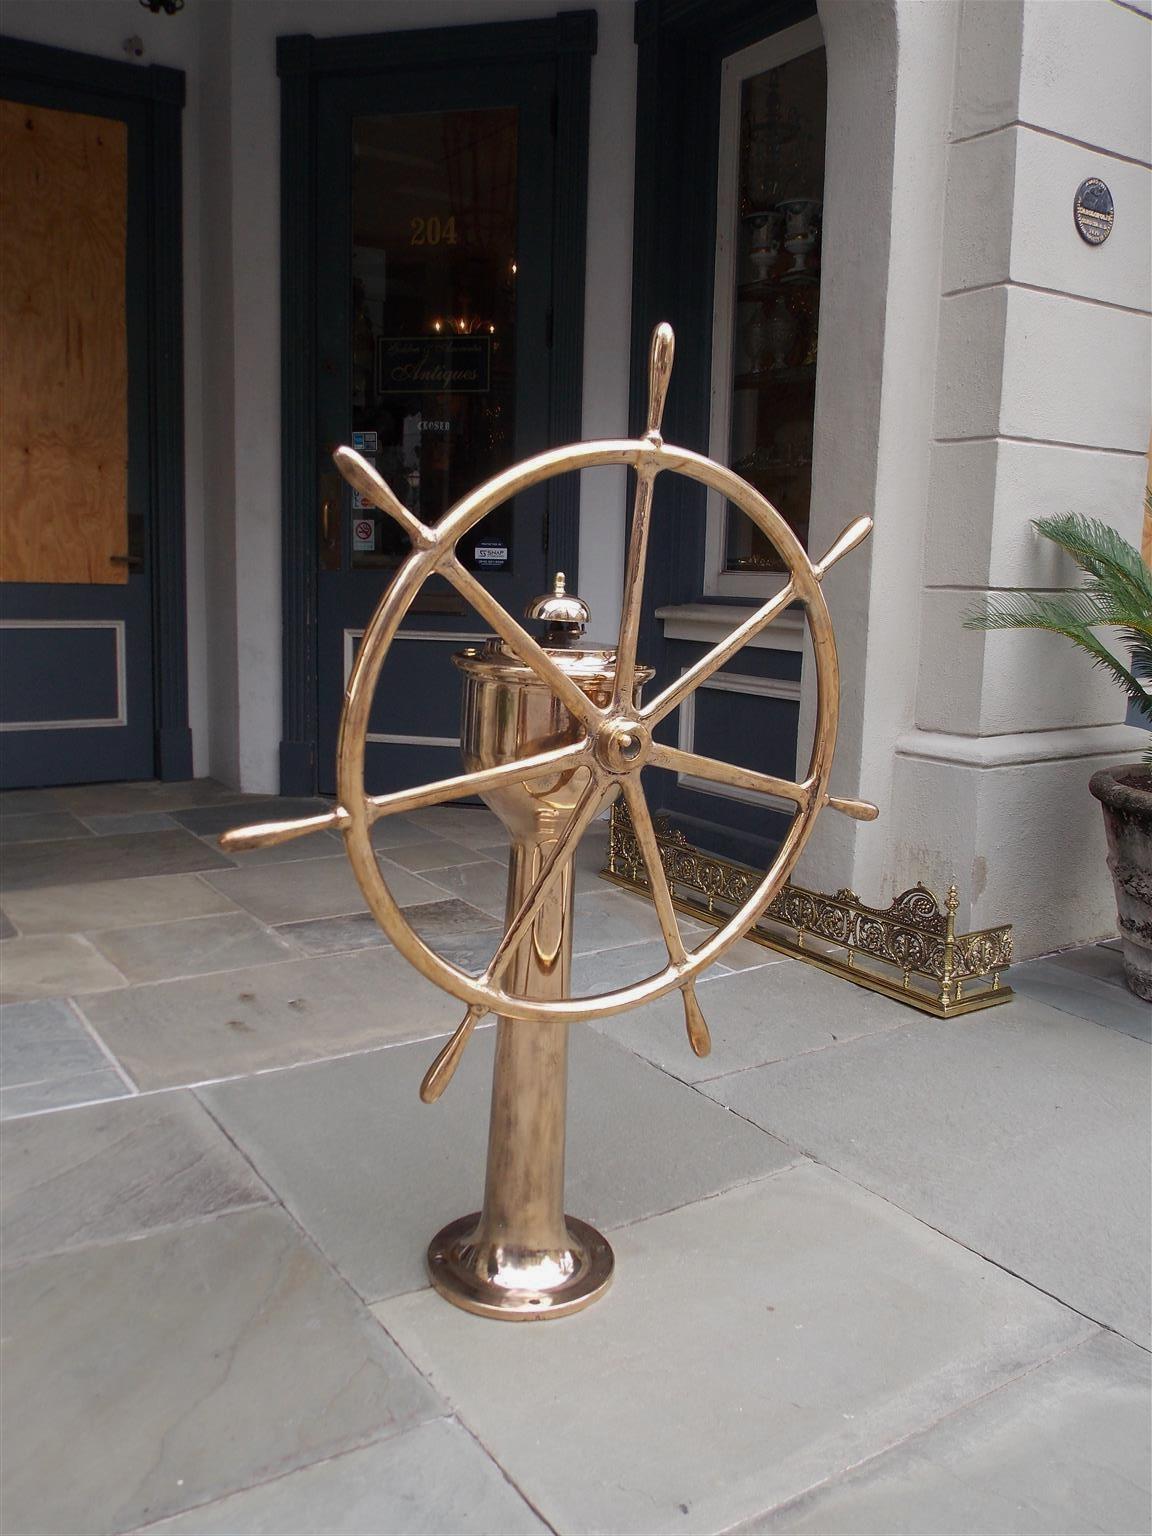 American brass nautical ship wheel with a centered brass hub connecting seven spindles with bulbous handles, and mounted to a solid brass geared pedestal with circular base and four exterior mounting holes, Mid-19th century. Stamped by maker: Neafie